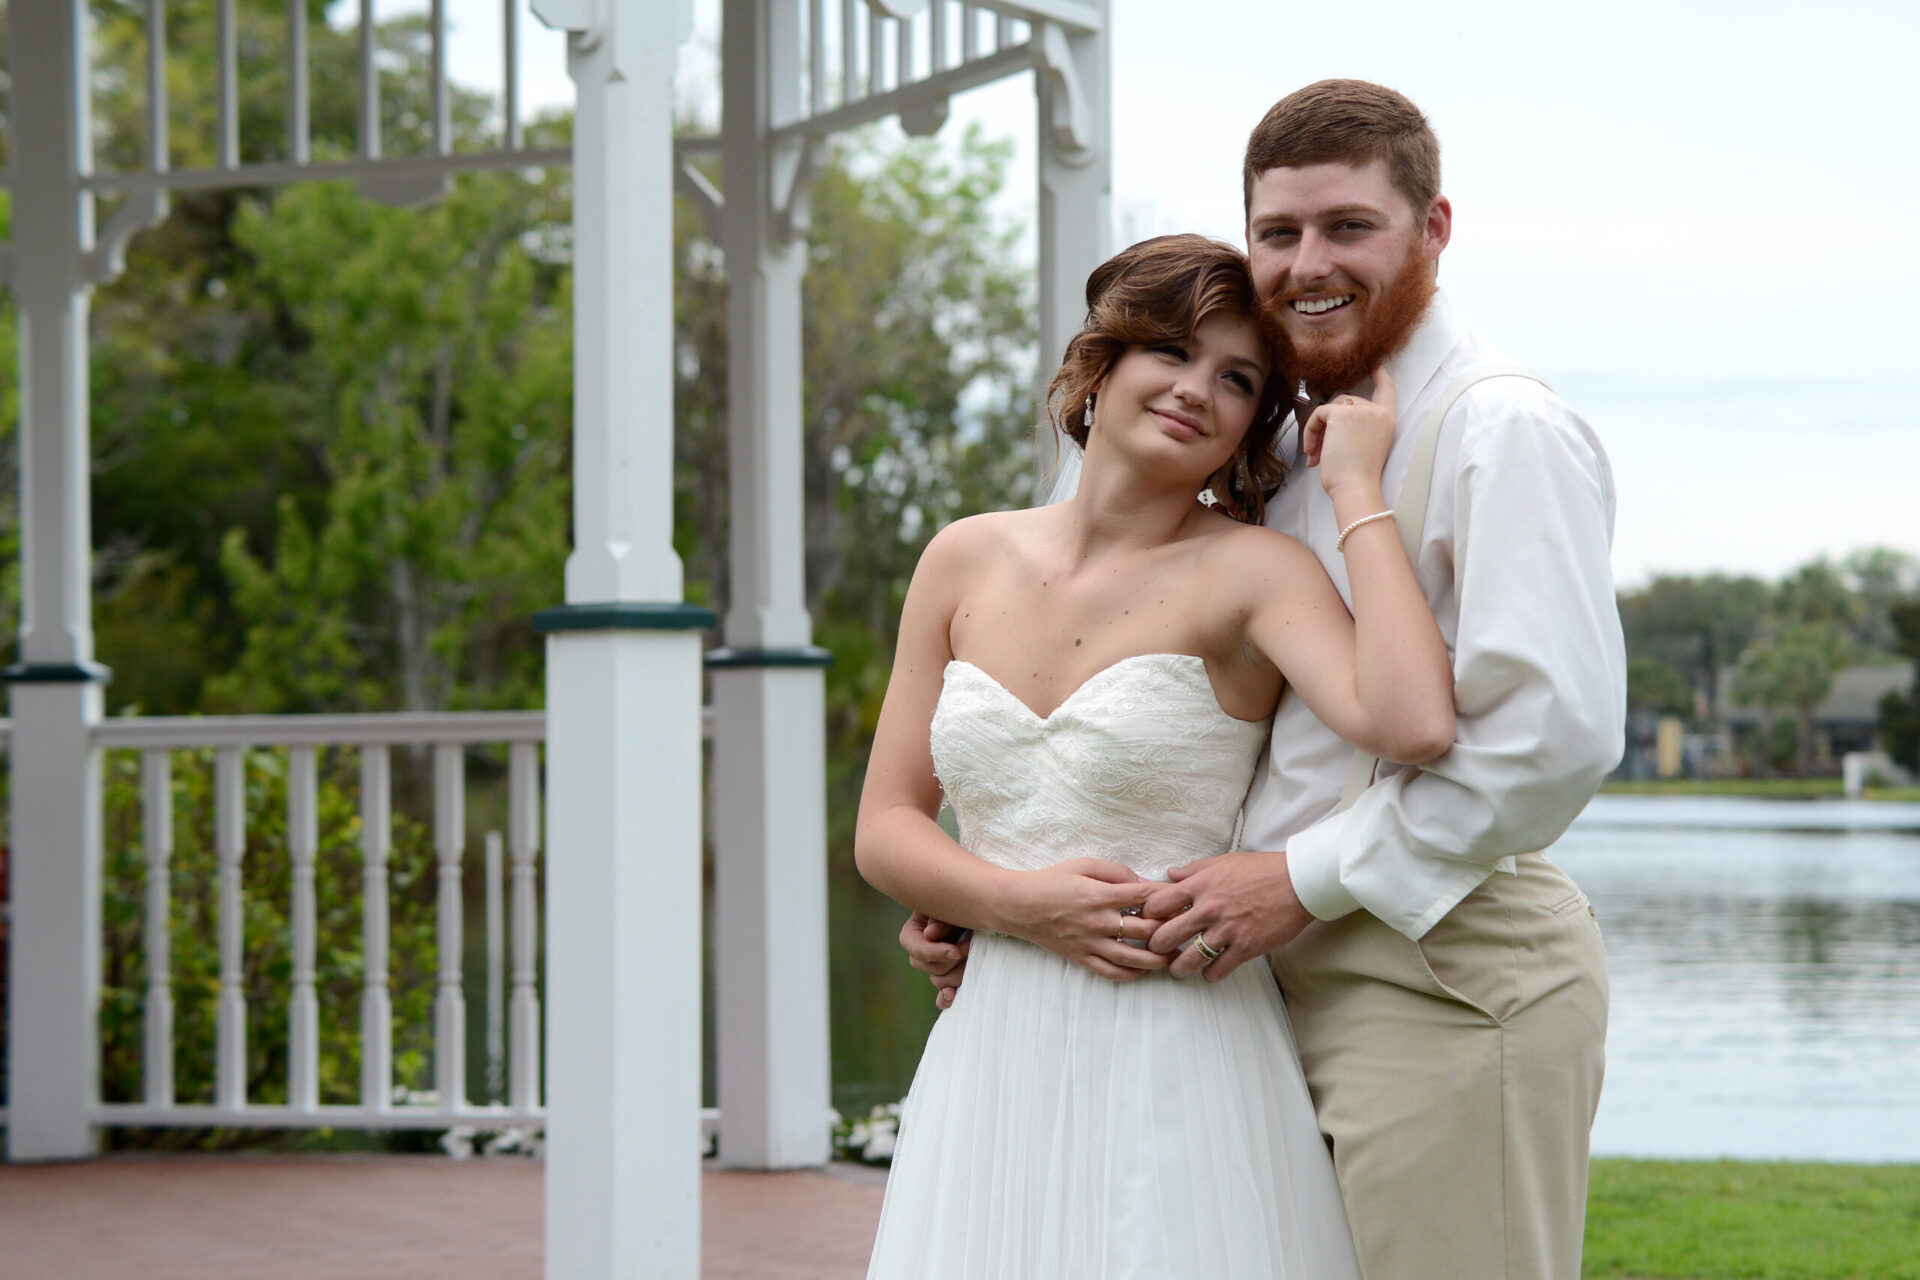 Bride and groom pose for their first photo as husband and wife at their beautiful wedding venue